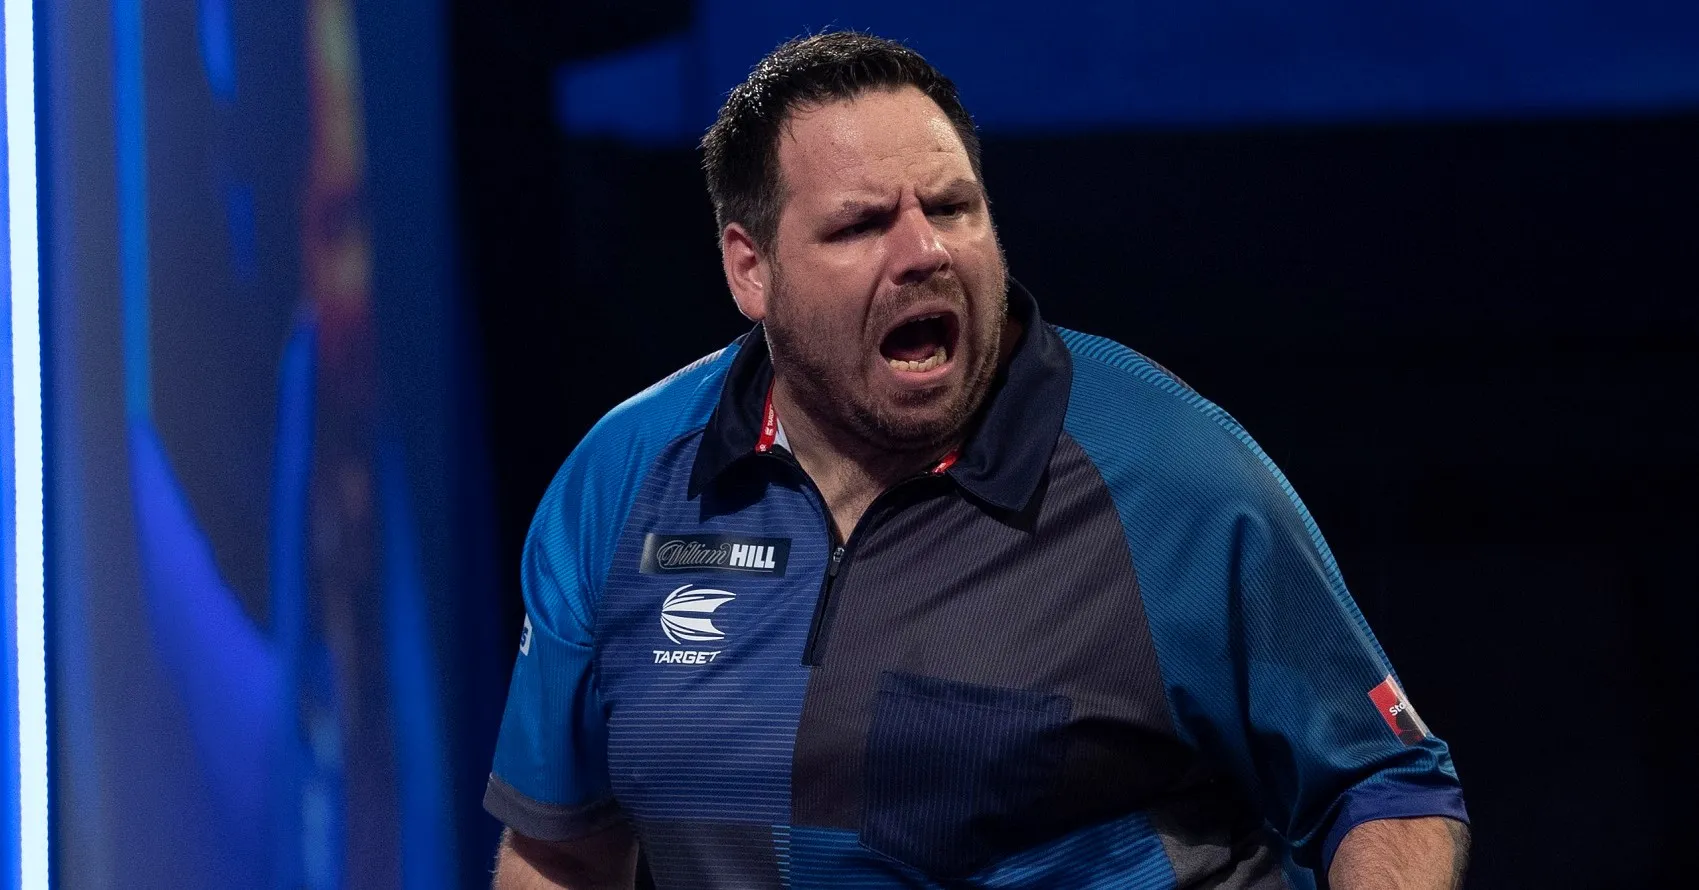 WLDCHAMPS RD1 ADRIAN LEWIS7A